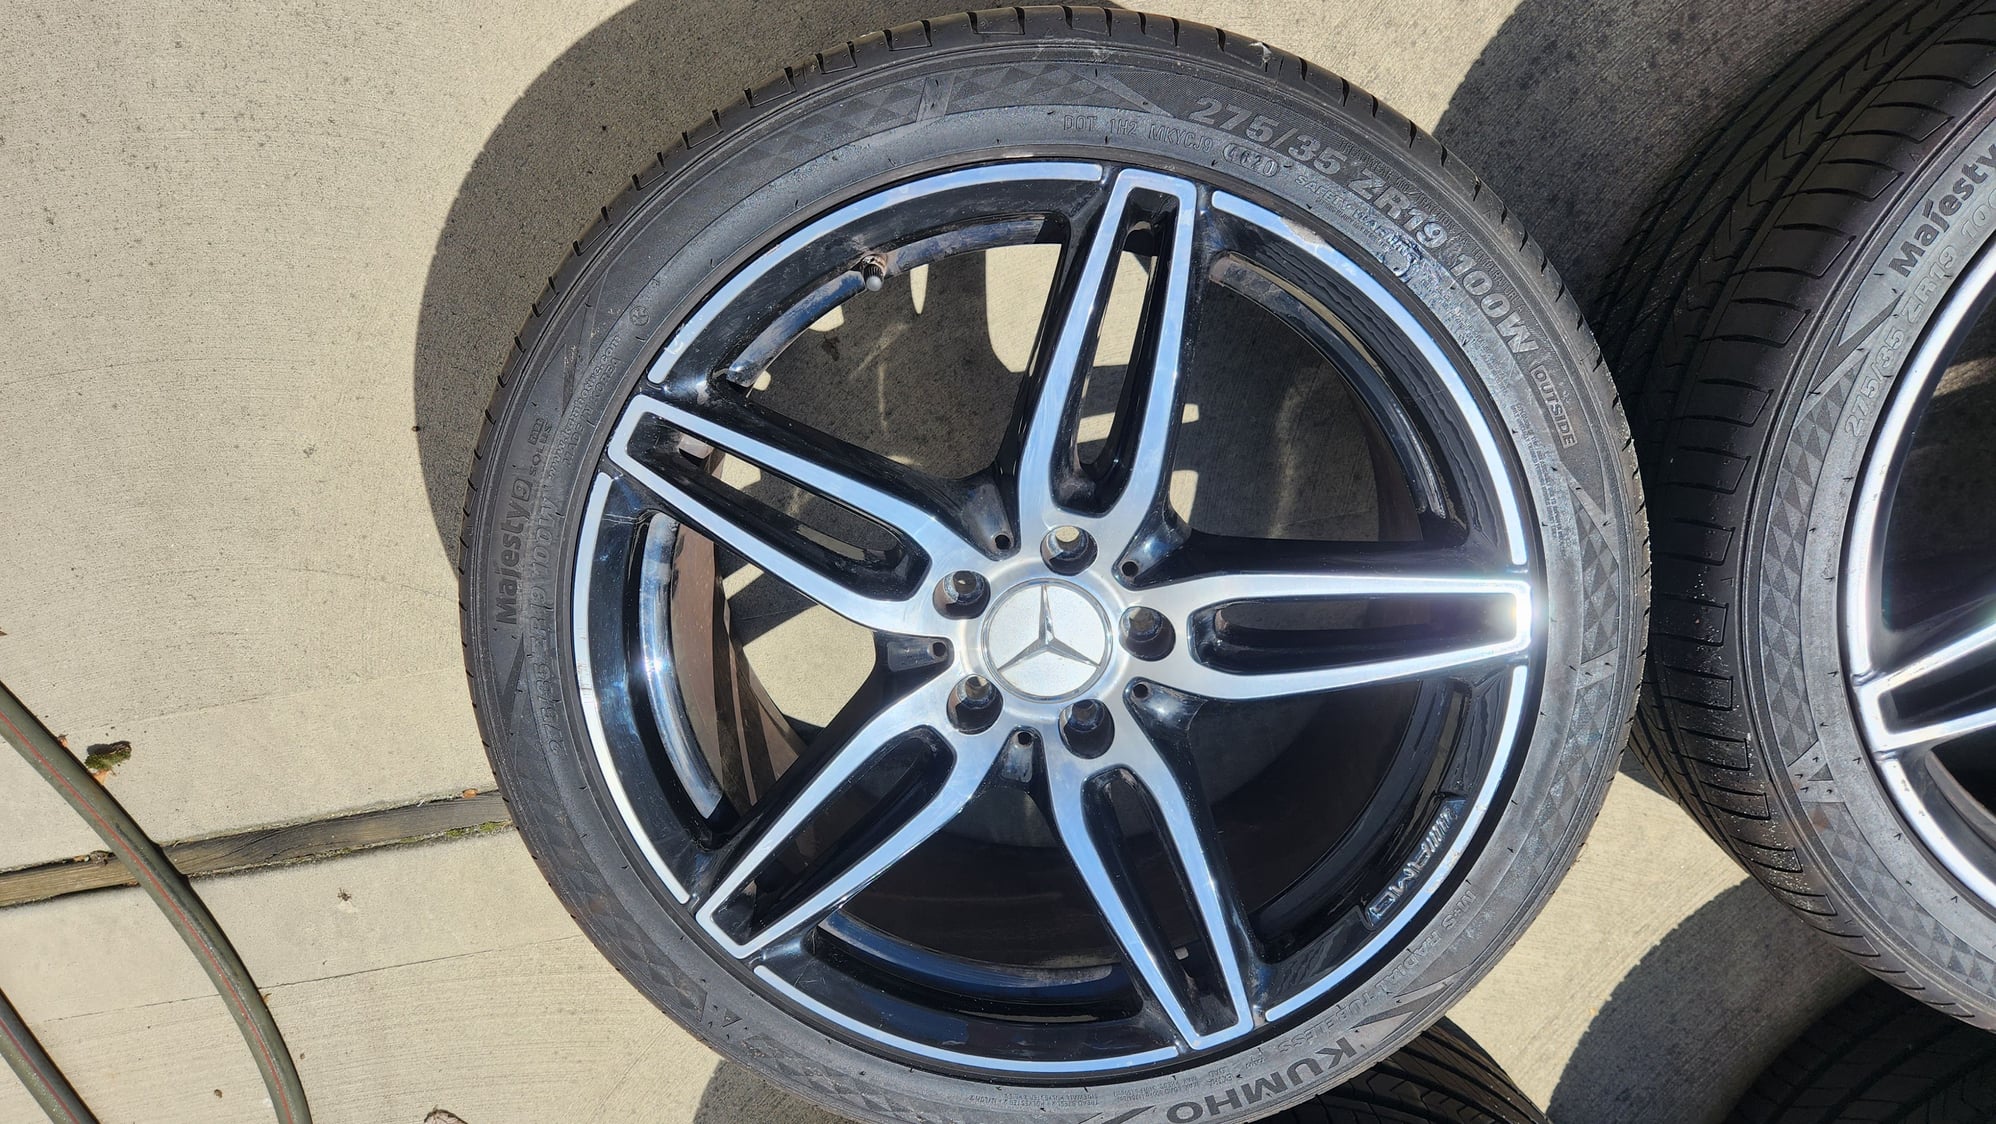 Wheels and Tires/Axles - OEM MB AMG 19" Bi-color wheels with new tires - Used - 2017 to 2024 Mercedes-Benz E-Class - 2019 to 2024 Mercedes-Benz E53 AMG - 2017 to 2018 Mercedes-Benz E43 AMG - Staten Island, NY 10314, United States